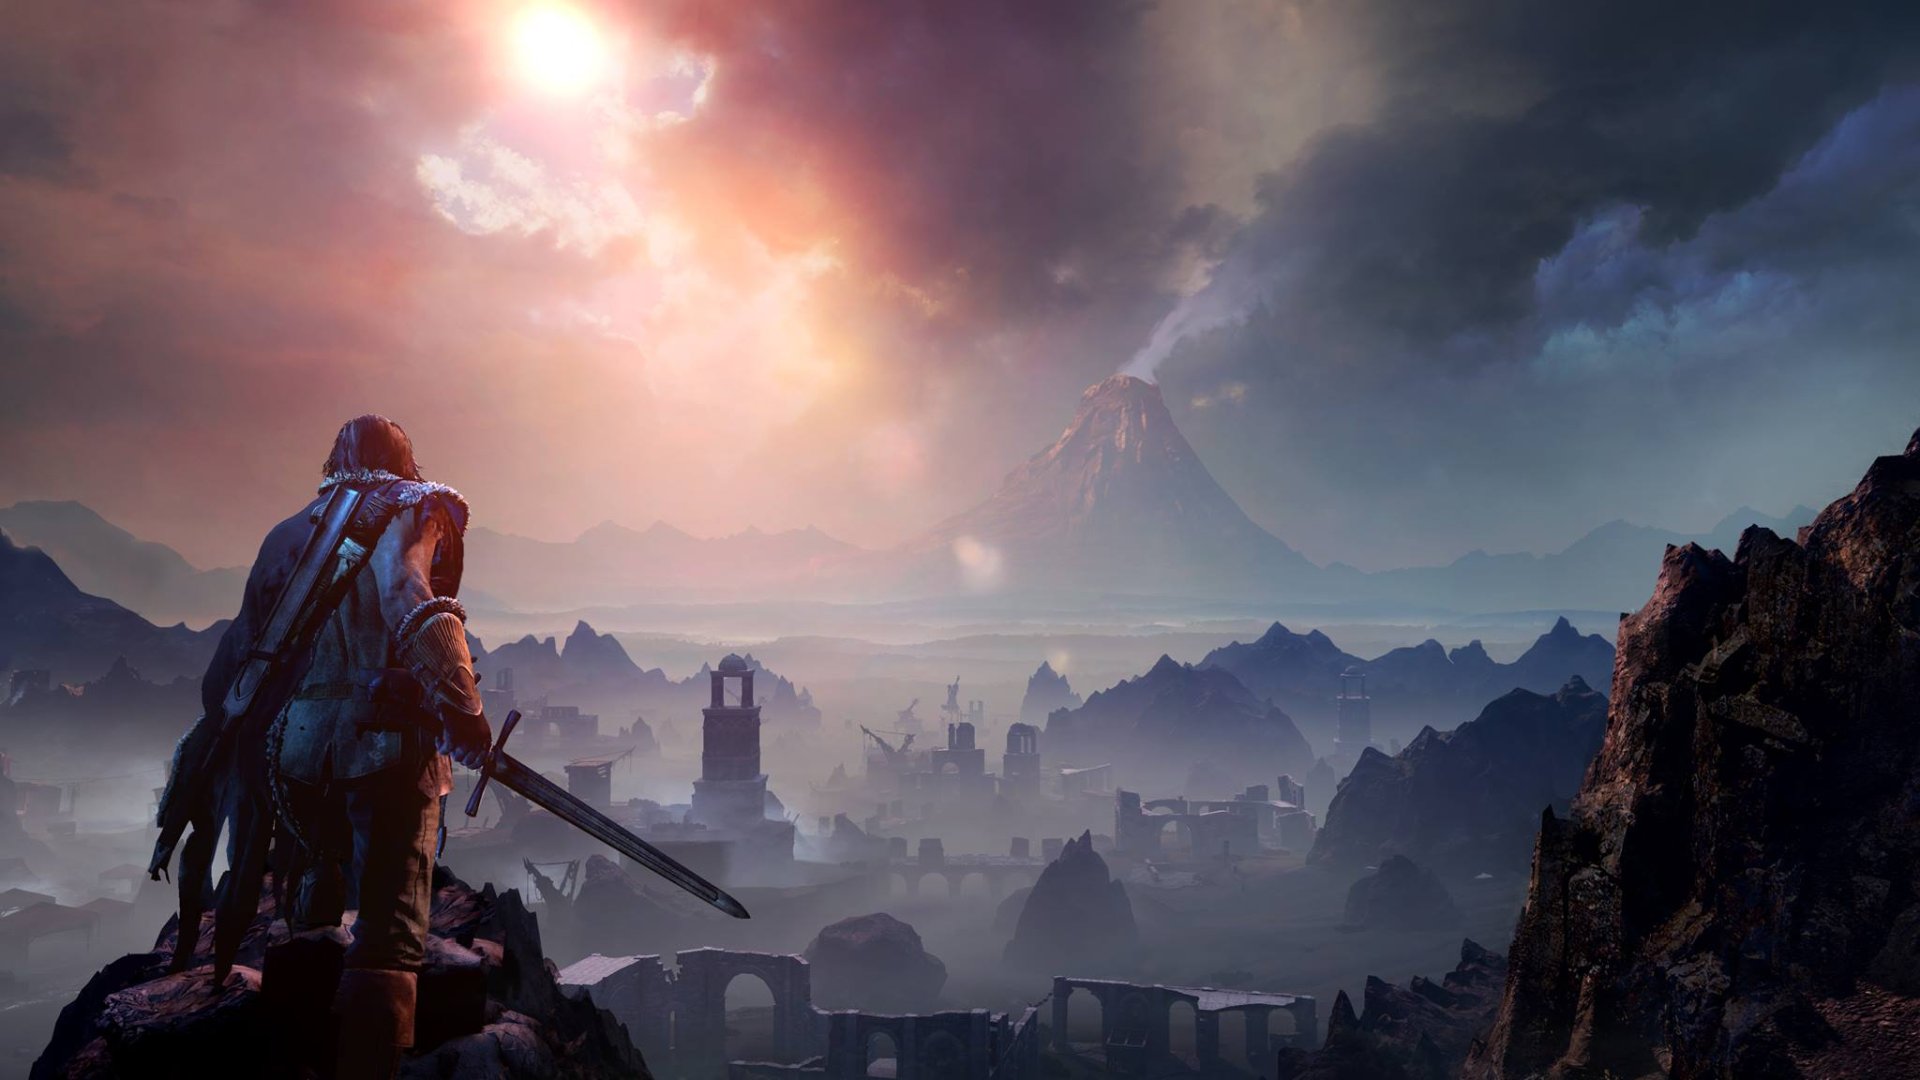 17 Best images about Shadow of Mordor on Pinterest | Shadow of